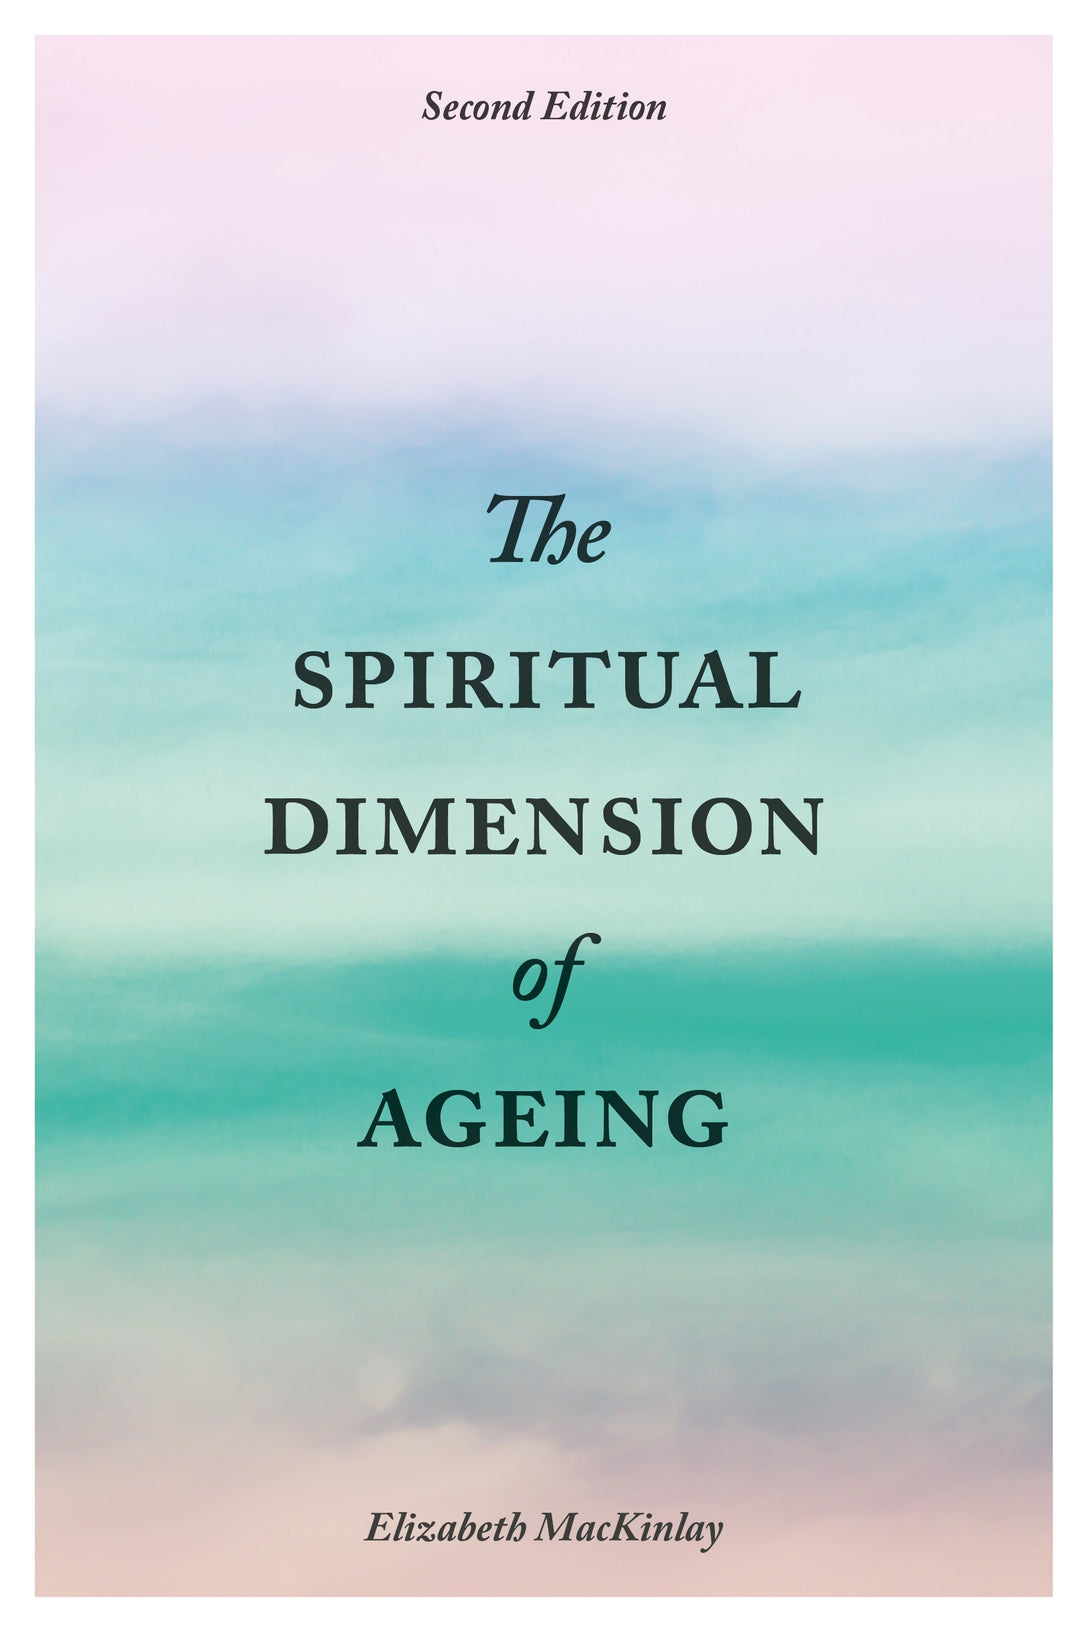 The Spiritual Dimension of Ageing, Second Edition by Elizabeth MacKinlay